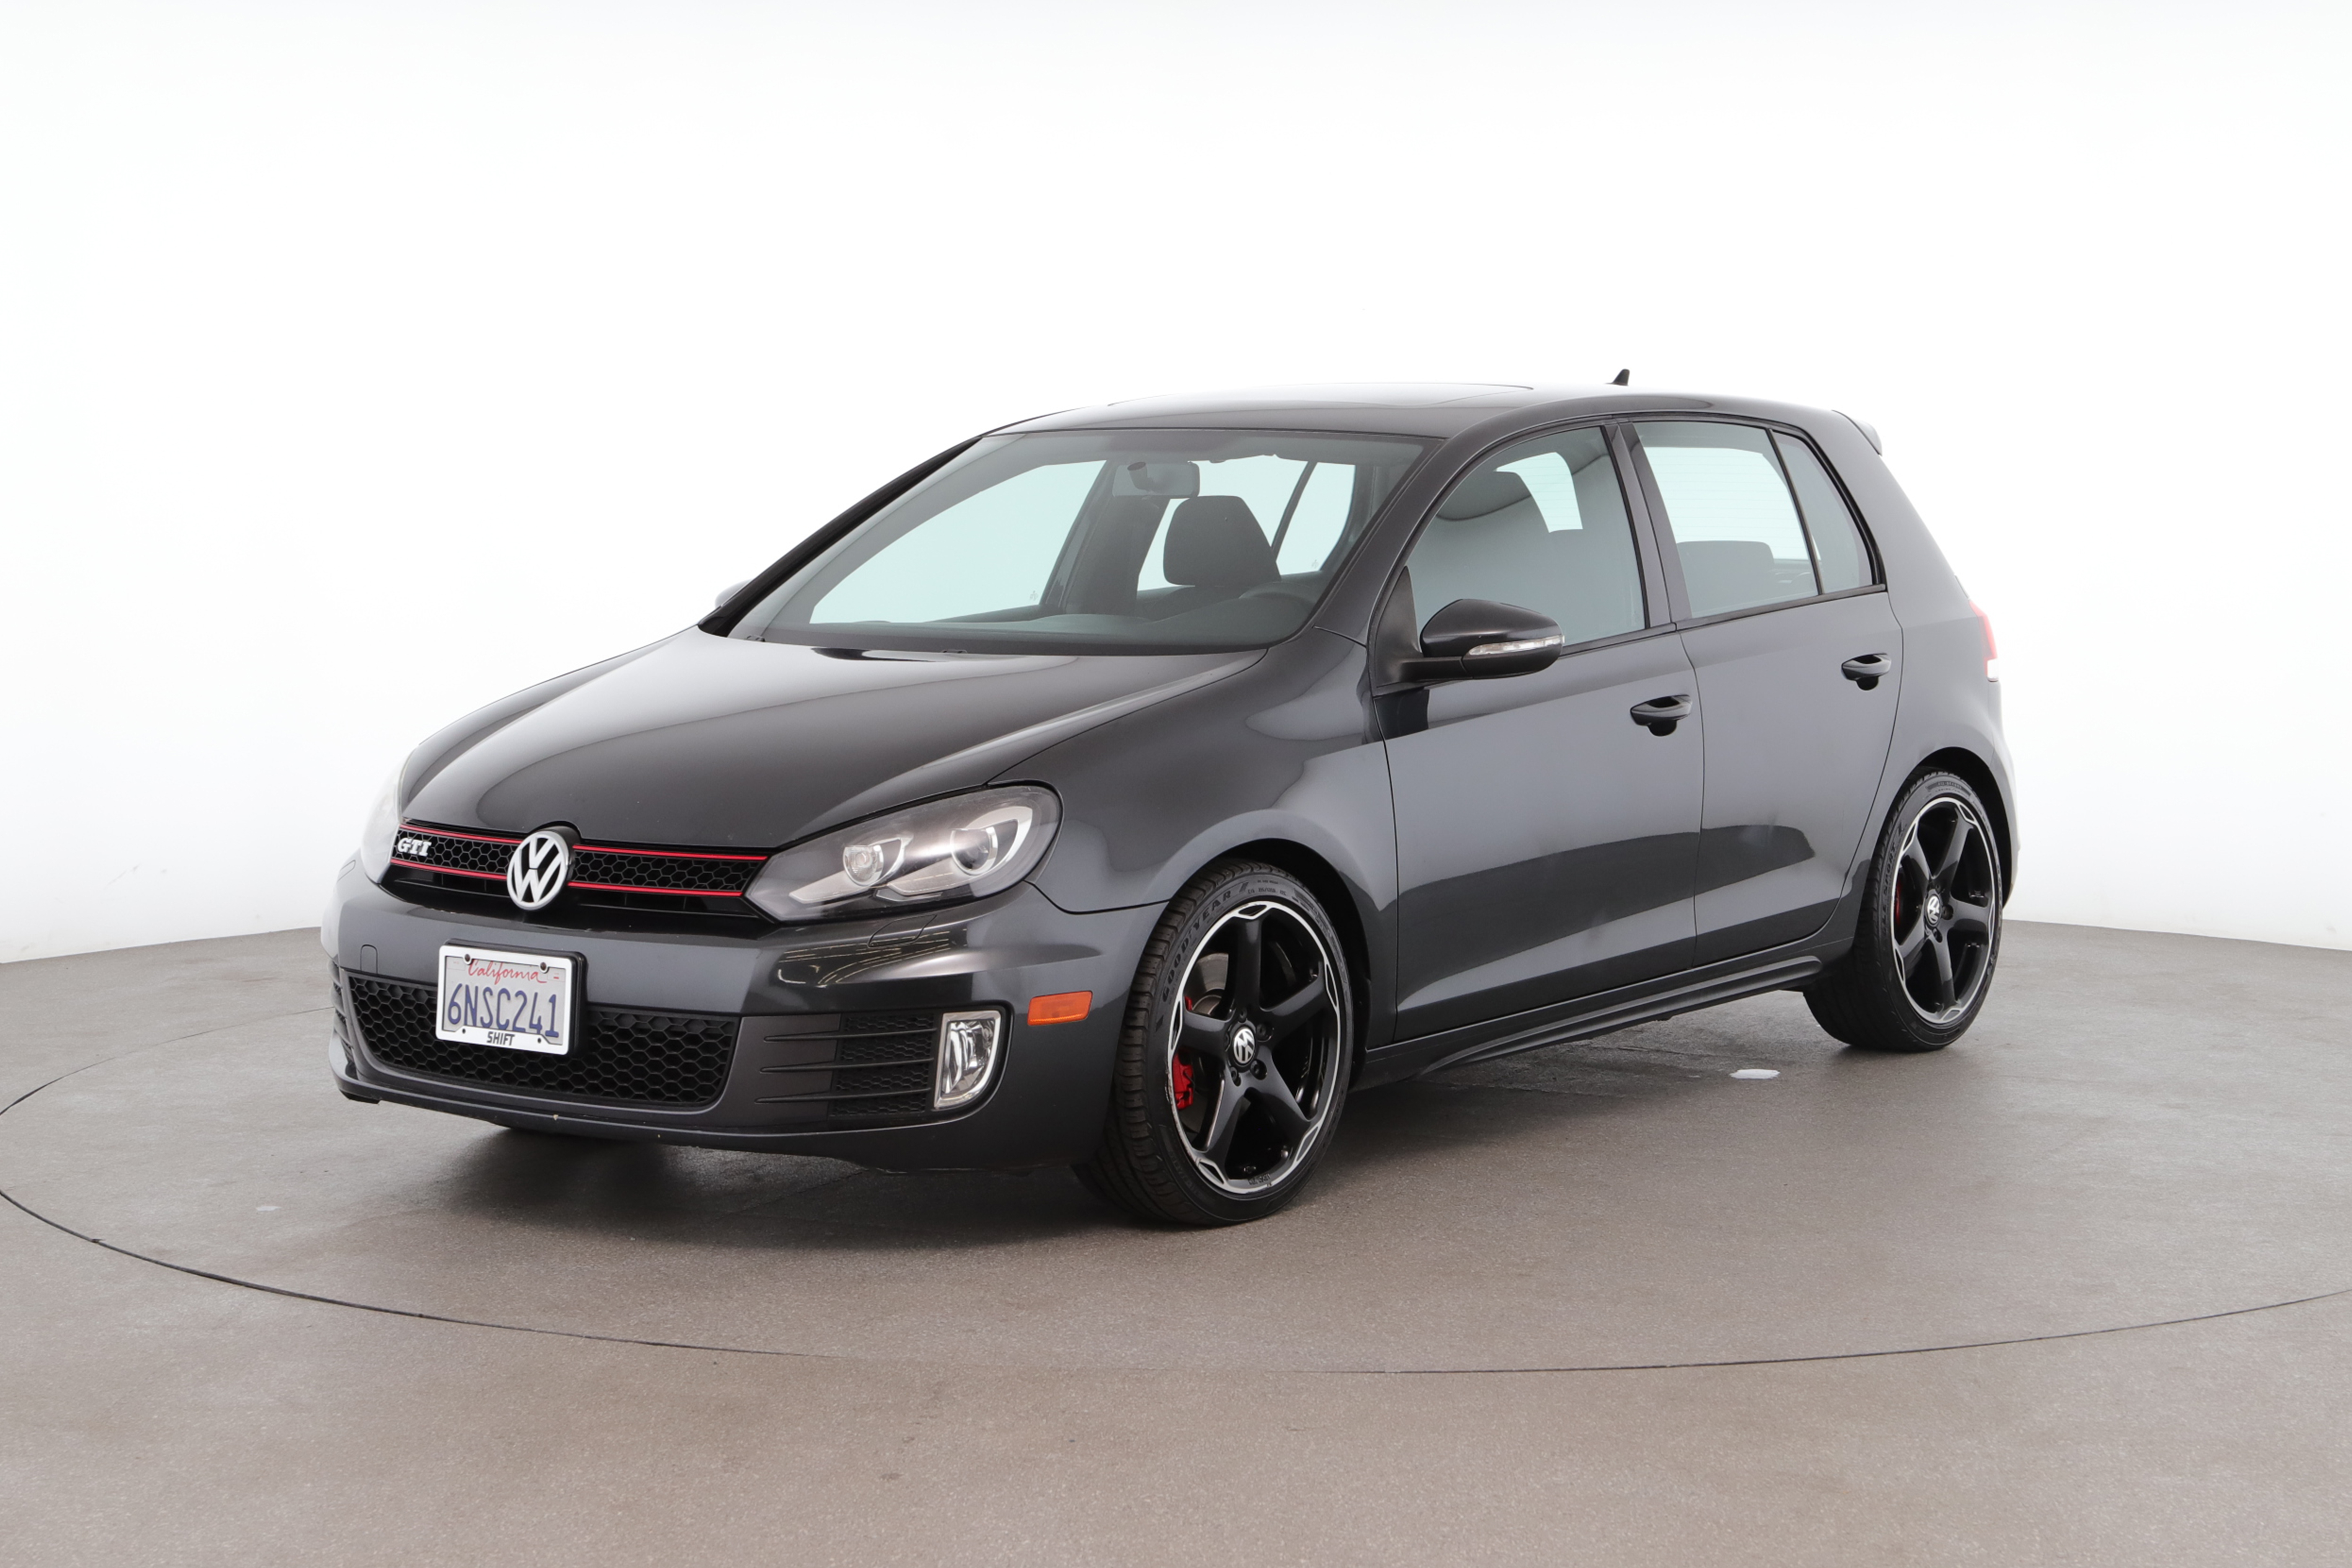 Used 2010 Gray Volkswagen GTI for $12,950